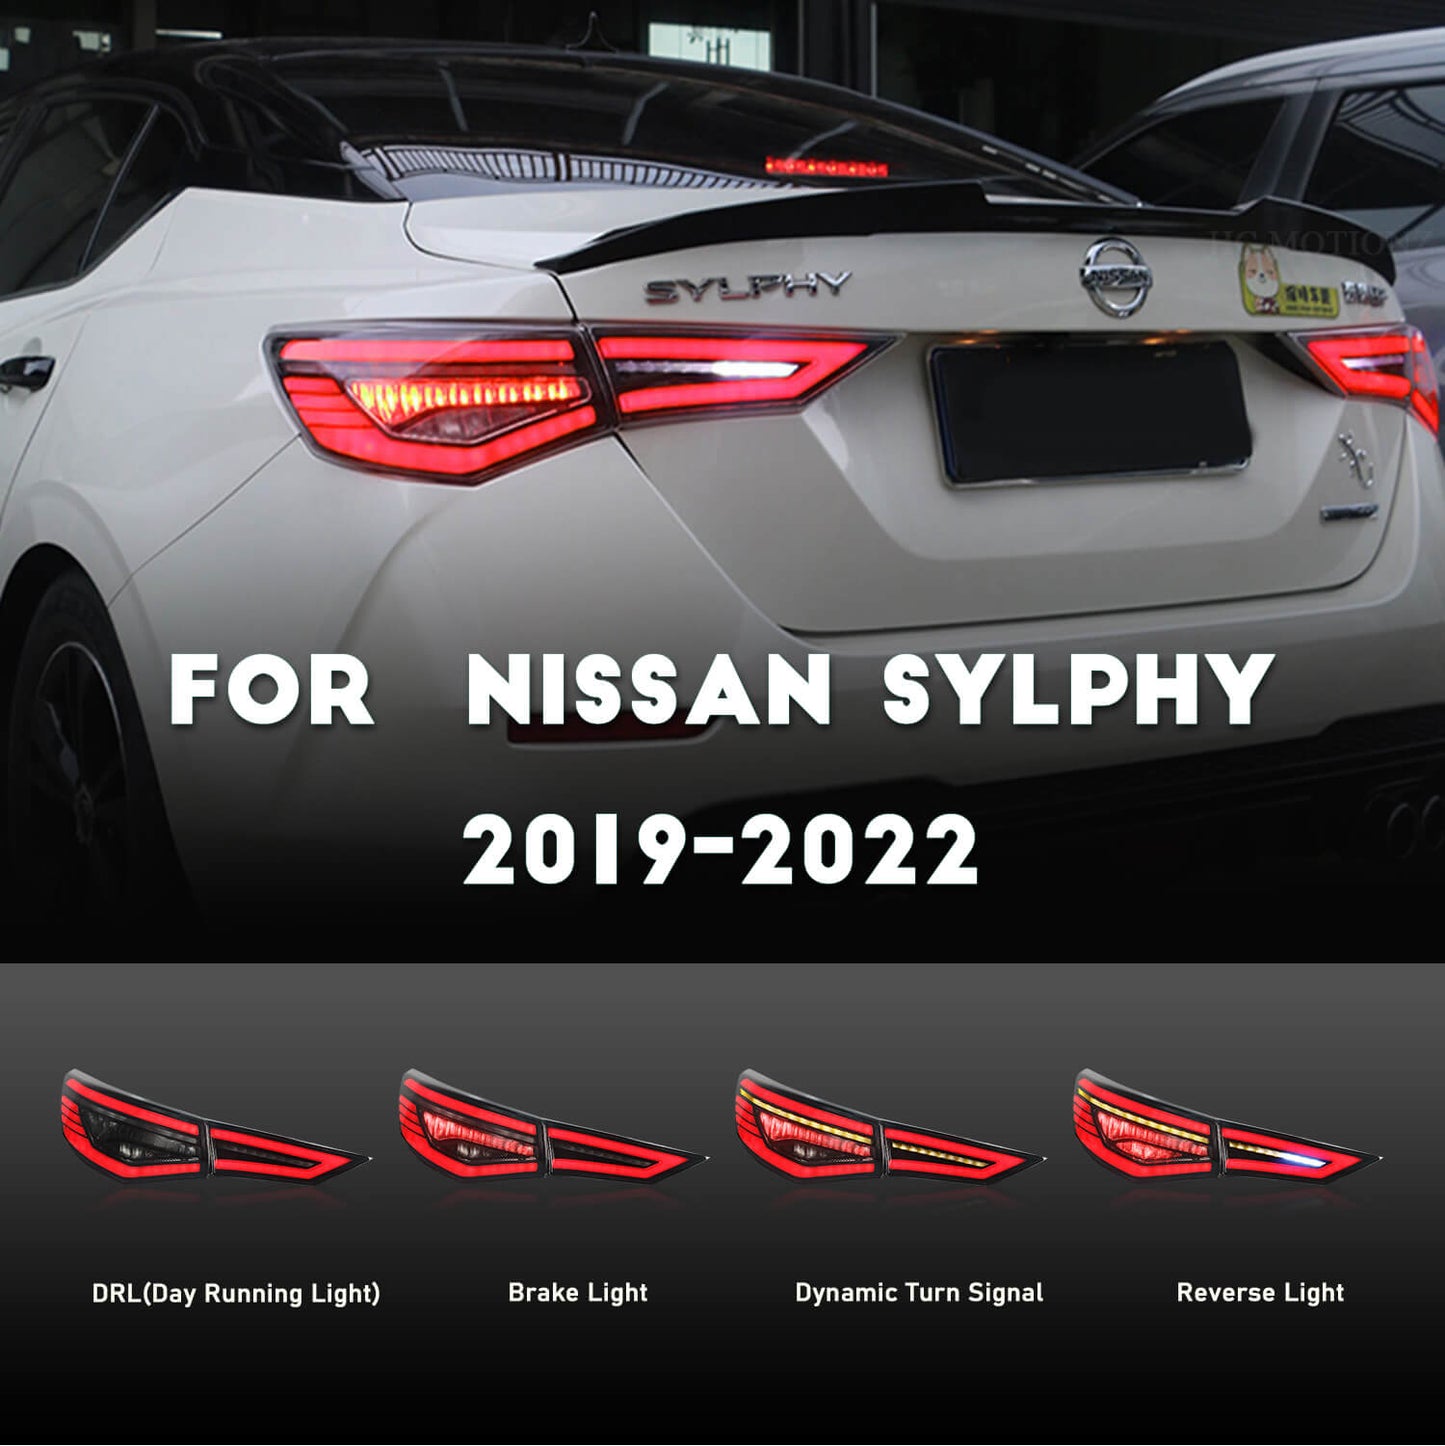 HCMOTION LED Tail Lights For Nissan Sylphy 2019-2022